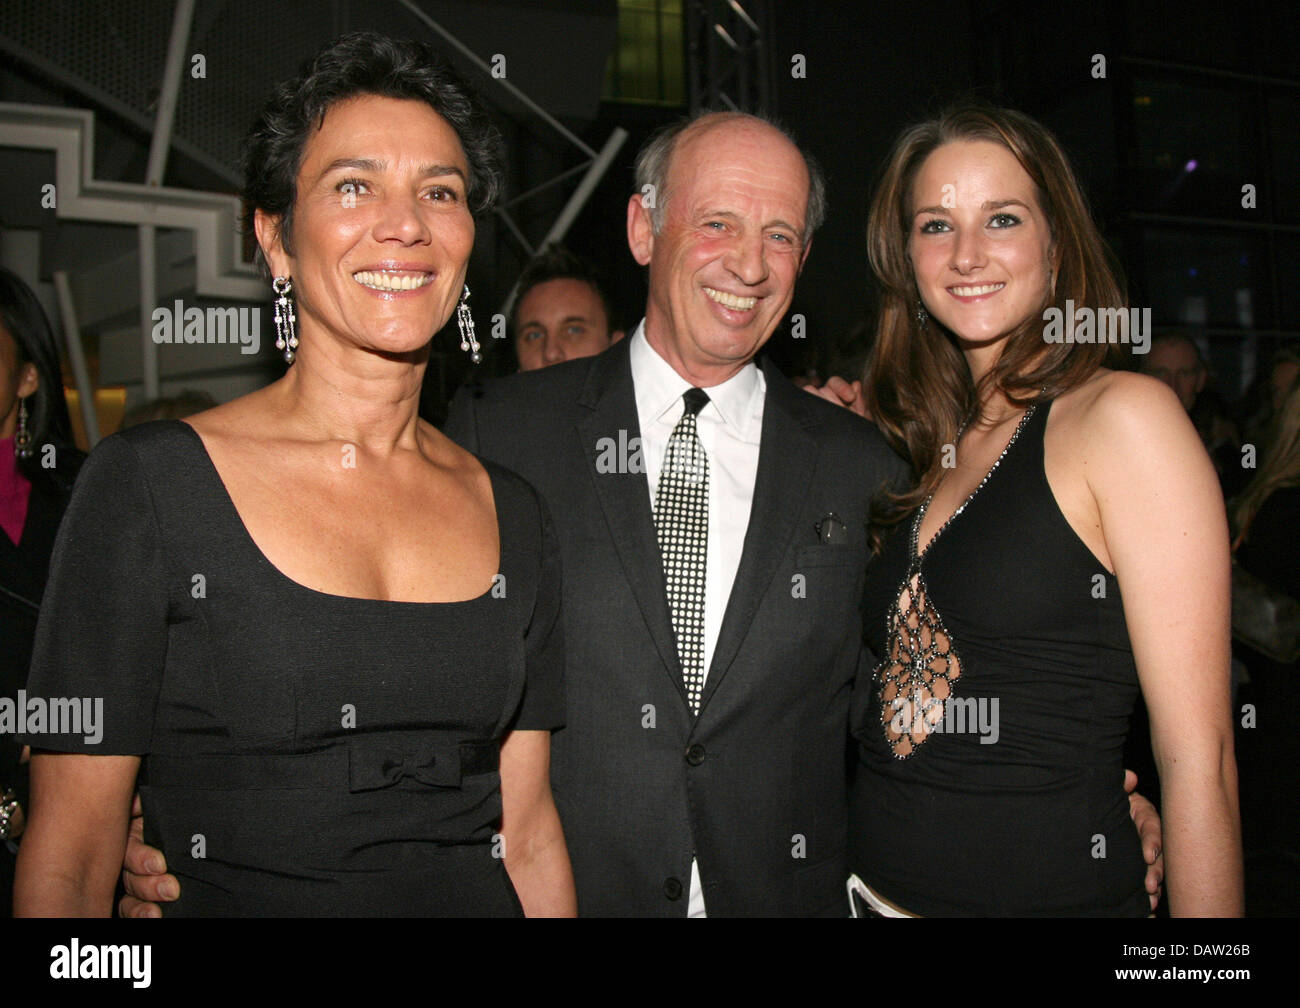 With willy bogner and wife sonia -Fotos und -Bildmaterial in hoher  Auflösung – Alamy